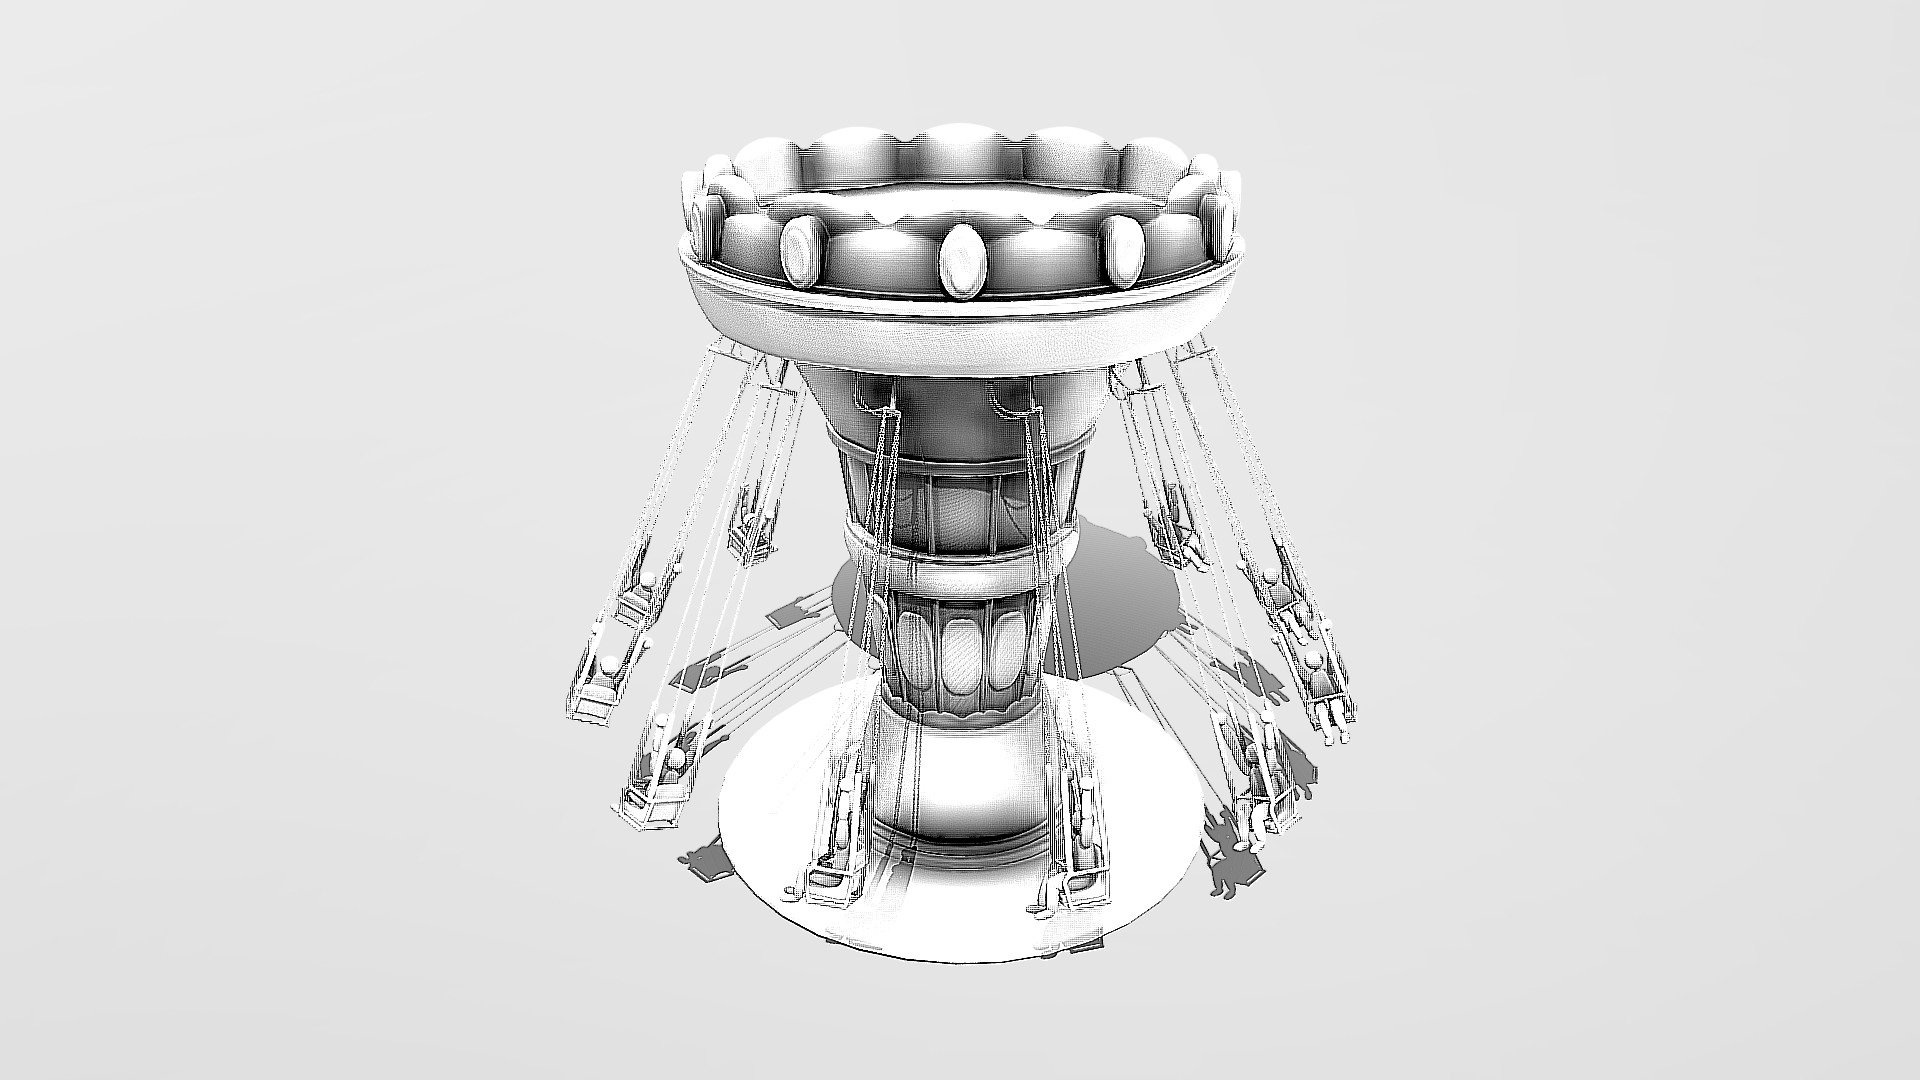 Somewhat reminiscent of one of the amusement park rides in a childhood game I played called Rollercoaster Tycoon. That was a fun game and I had good memories from it. :)

Theme: Ride

Day 28 of 3DInktober2019

Sculpted in ZBrush and using a free chain brush for the chairs, found on Badking.com.au:

https://www.badking.com.au/site/shop/industrial-custom-brushes/chain-brush/

The ZRemesh feature worked surprisingly well at preserving the overall structure of the chain meshes :p - Swing Ride - Day 28 #3DInktober2019-Ride - Download Free 3D model by MMKH 3d model